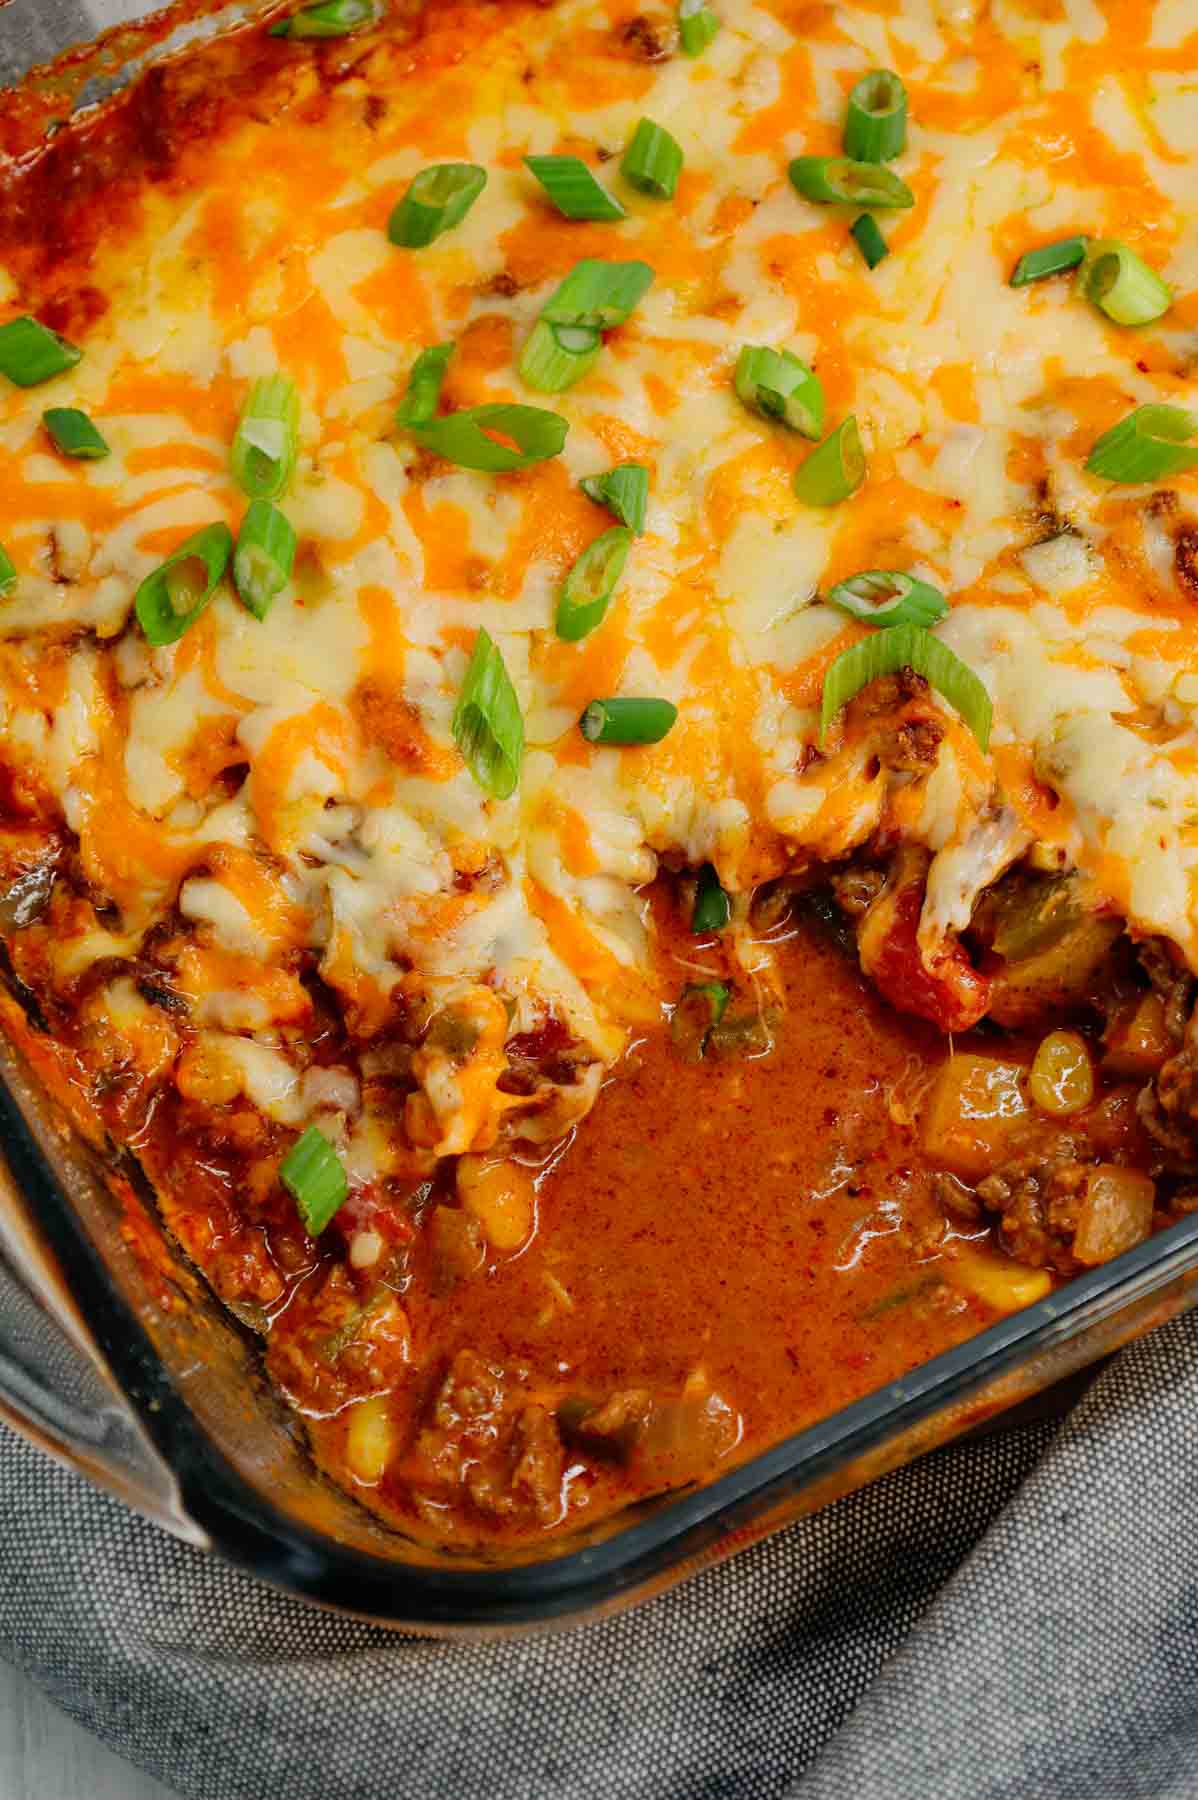 Taco Potato Casserole is a hearty dinner loaded with cubed russet potatoes, ground beef, onions, green bell peppers, Rotel diced tomatoes, salsa, taco seasoning, cheddar soup and shredded cheese.